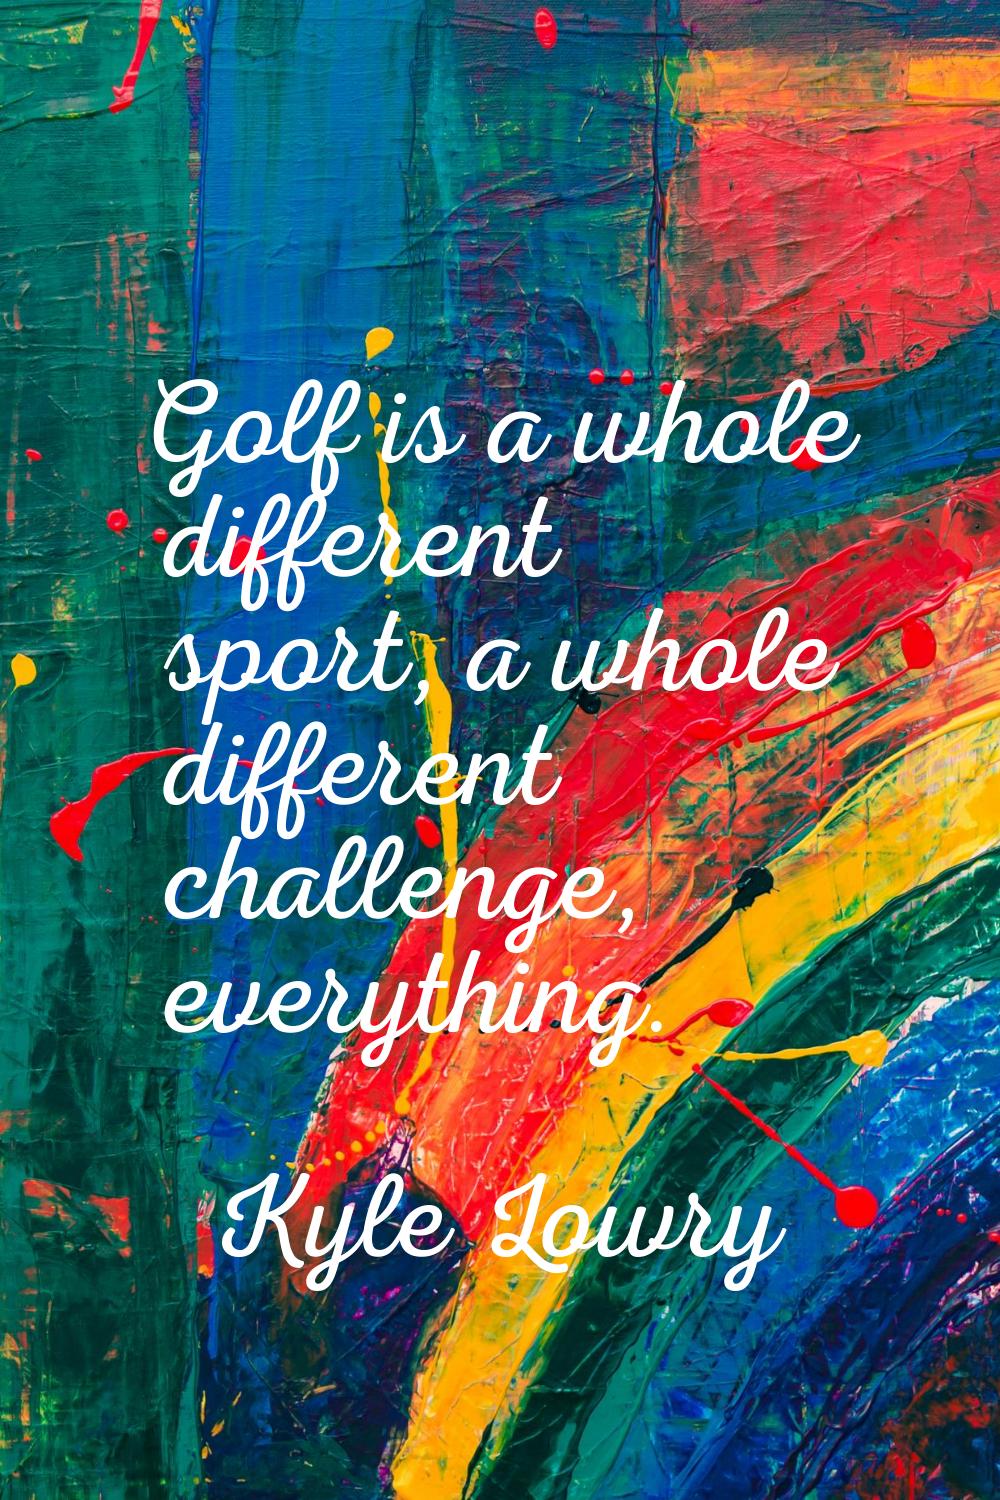 Golf is a whole different sport, a whole different challenge, everything.